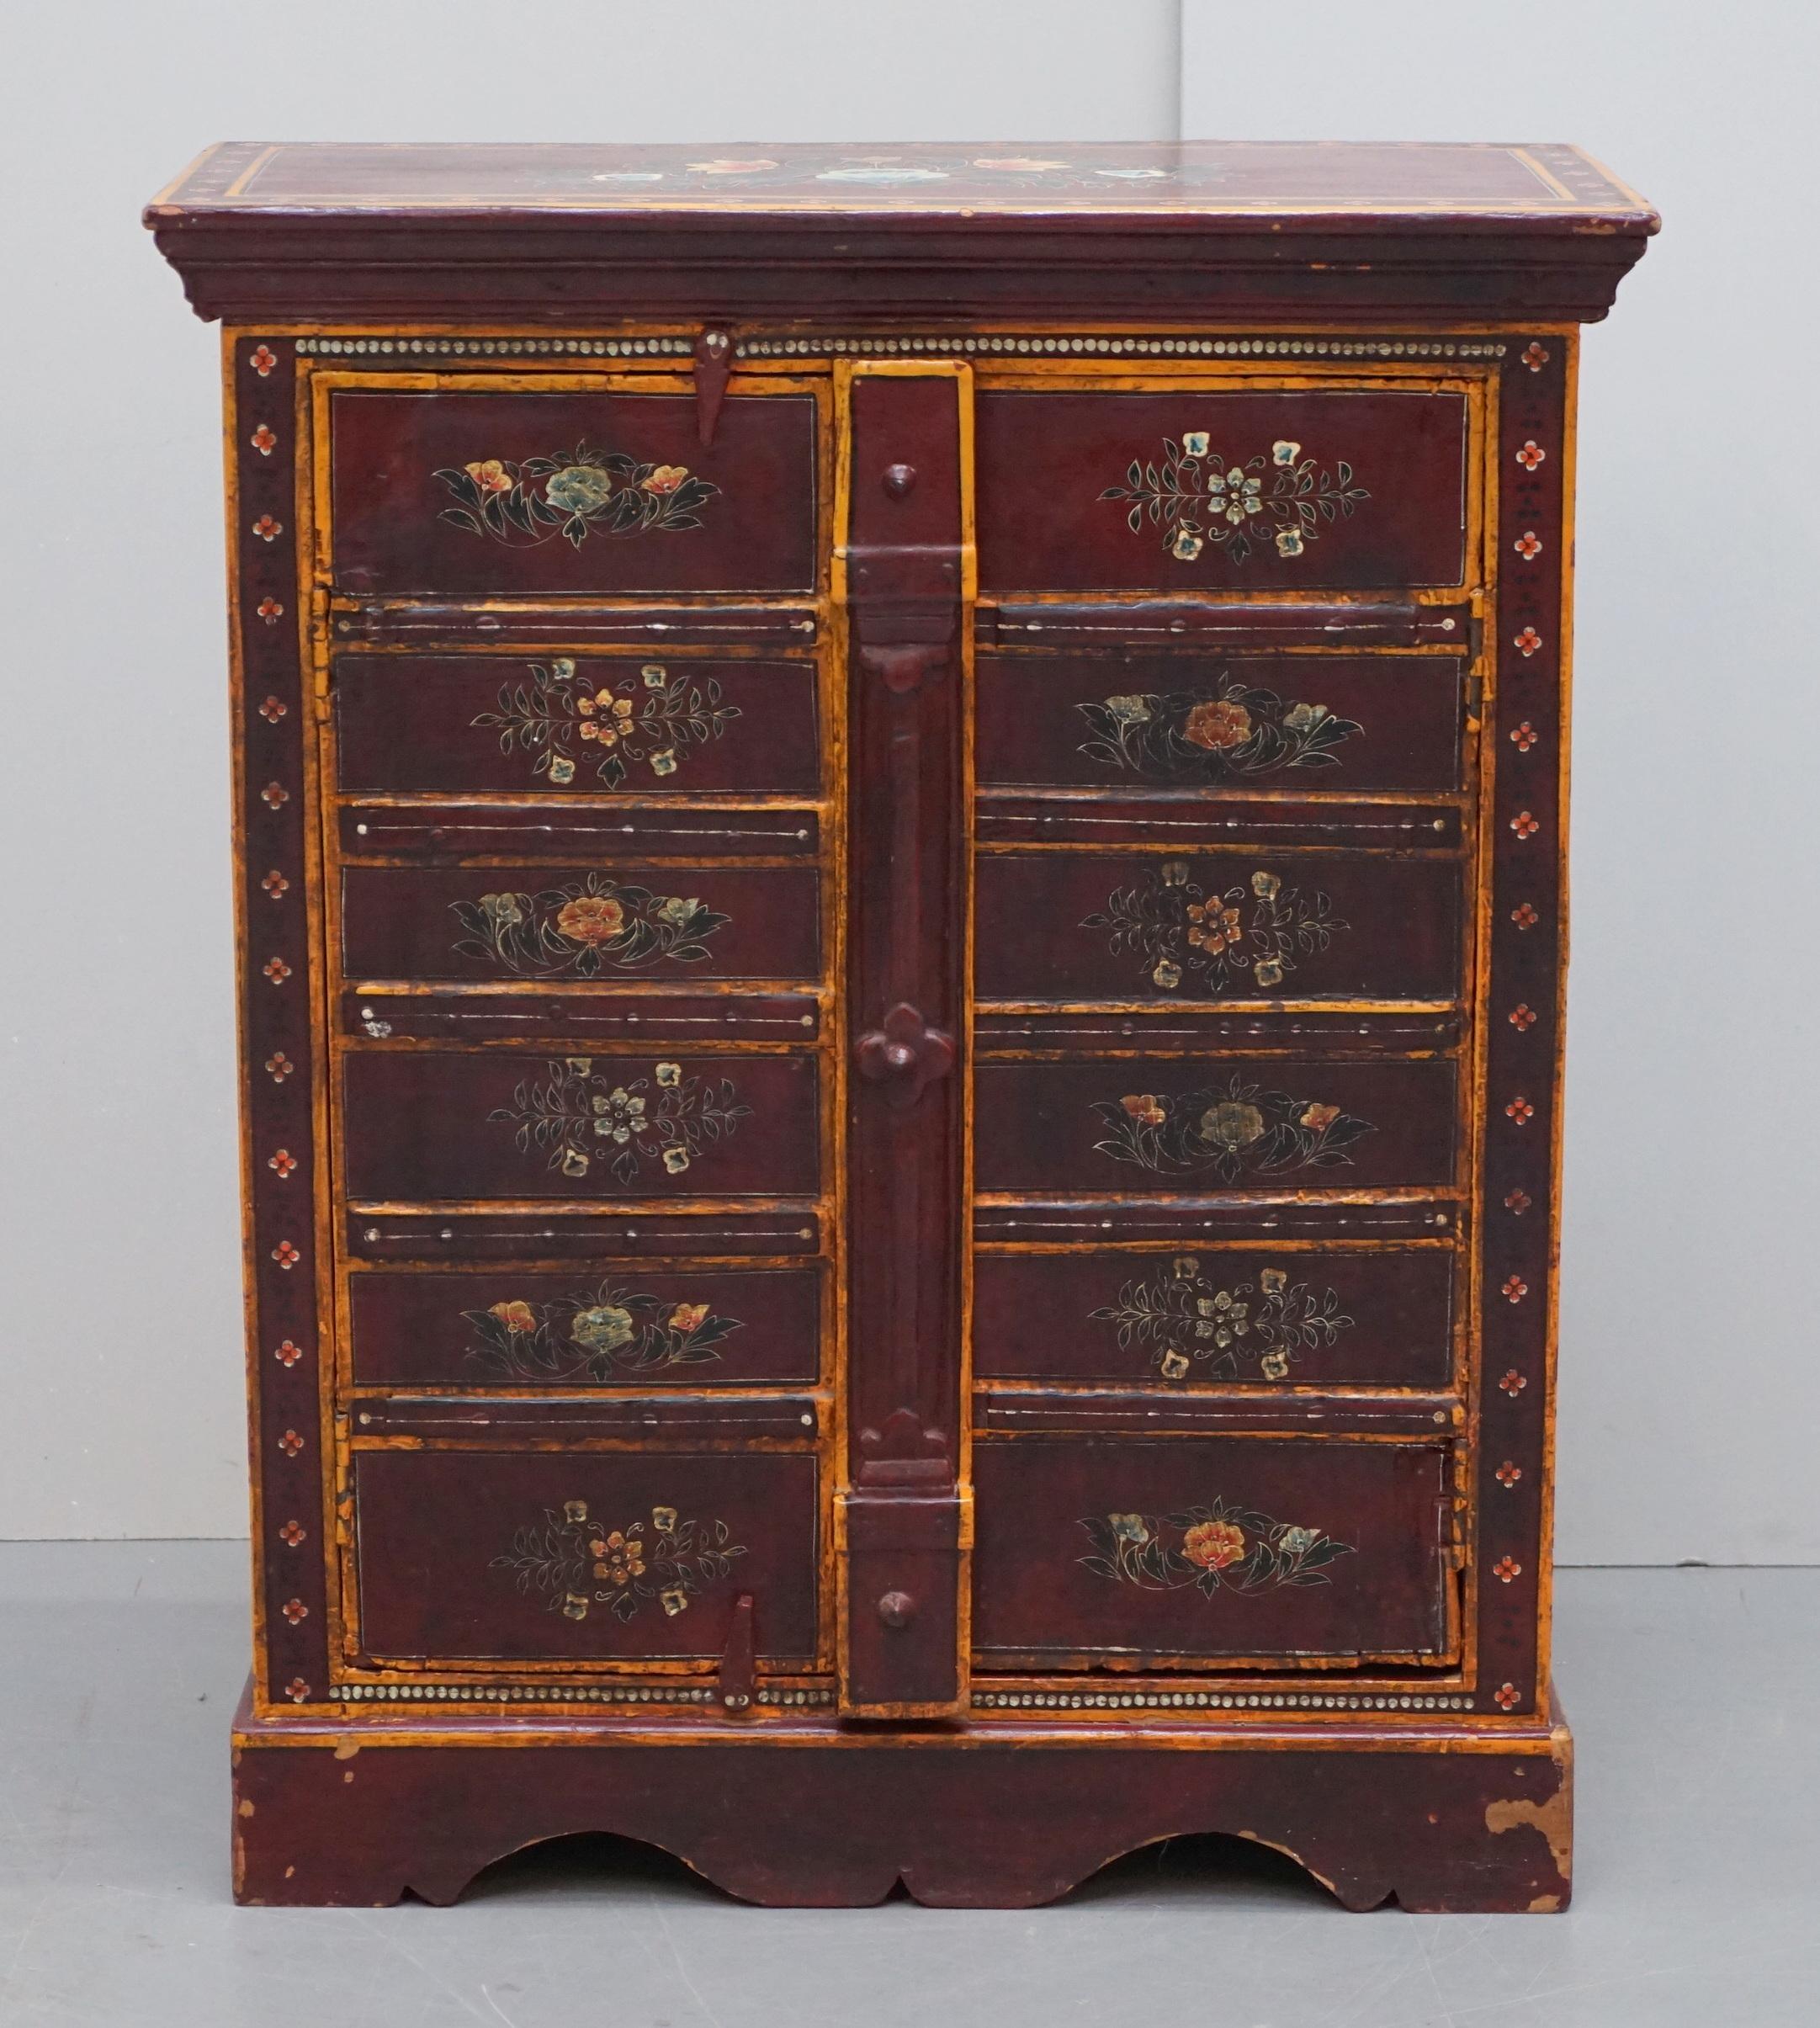 We are delighted to offer for sale this lovely circa 1900 eastern hand painted with floral details side pot cupboard with original metal strapwork door supports

A very well made and decorative piece, circa 1900 and from the far east, these pieces